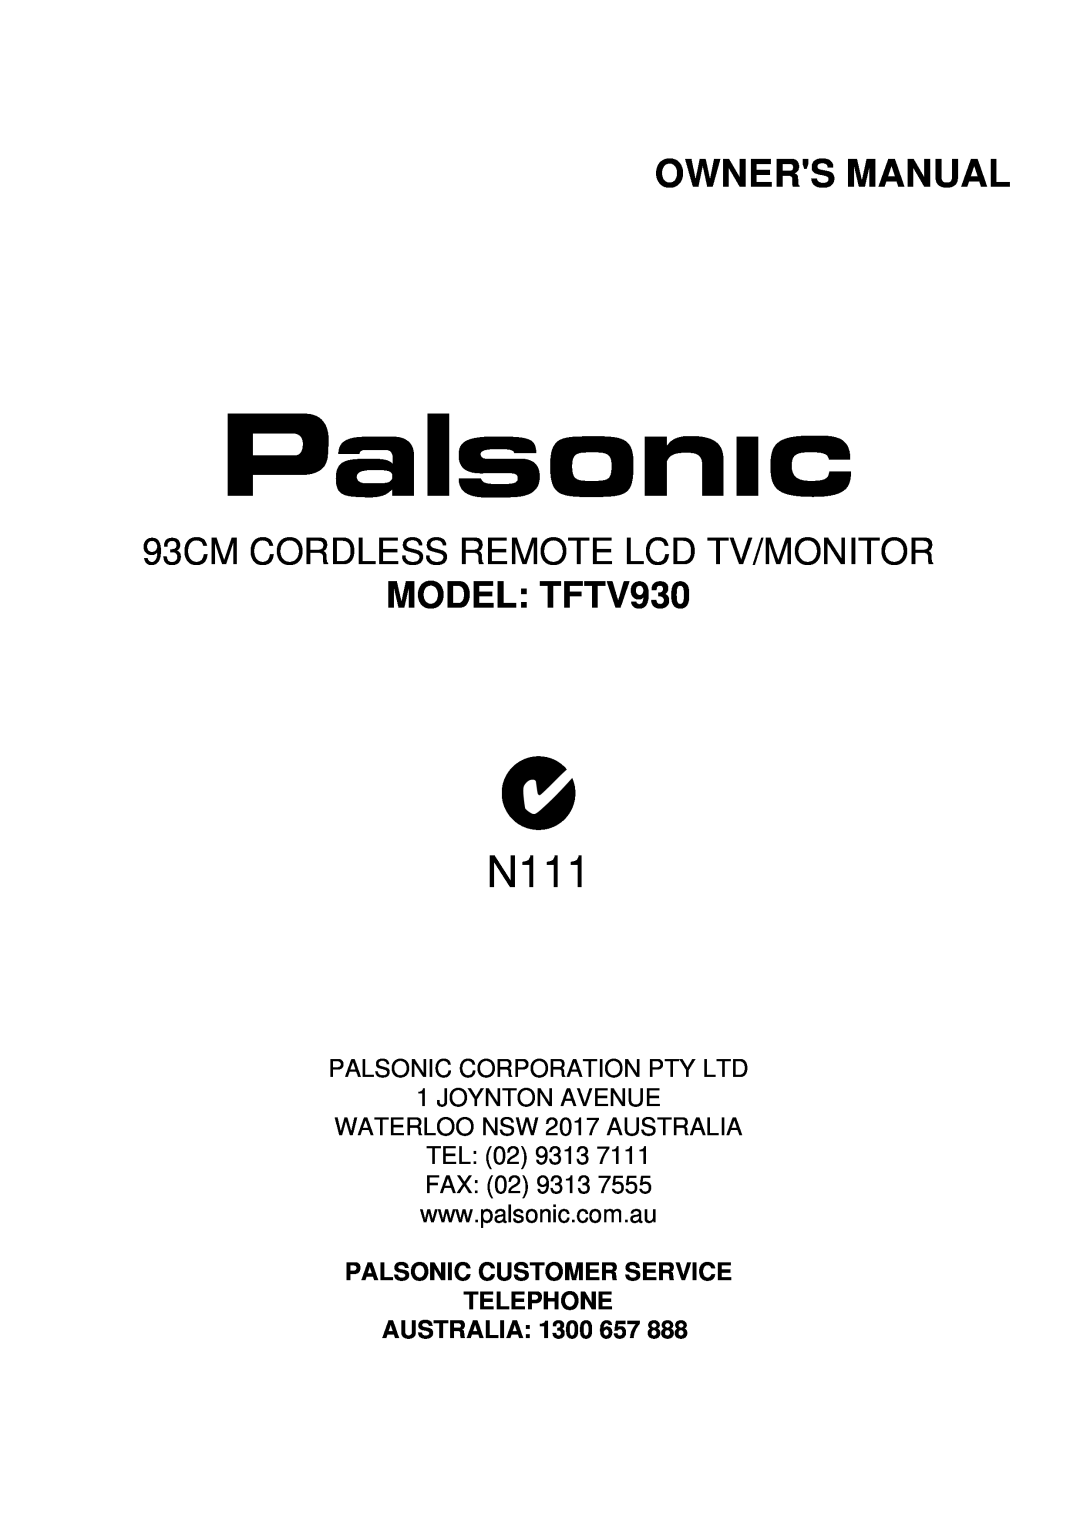 Palsonic owner manual MODEL TFTV930, N111, Owners Manual, 93CM CORDLESS REMOTE LCD TV/MONITOR 